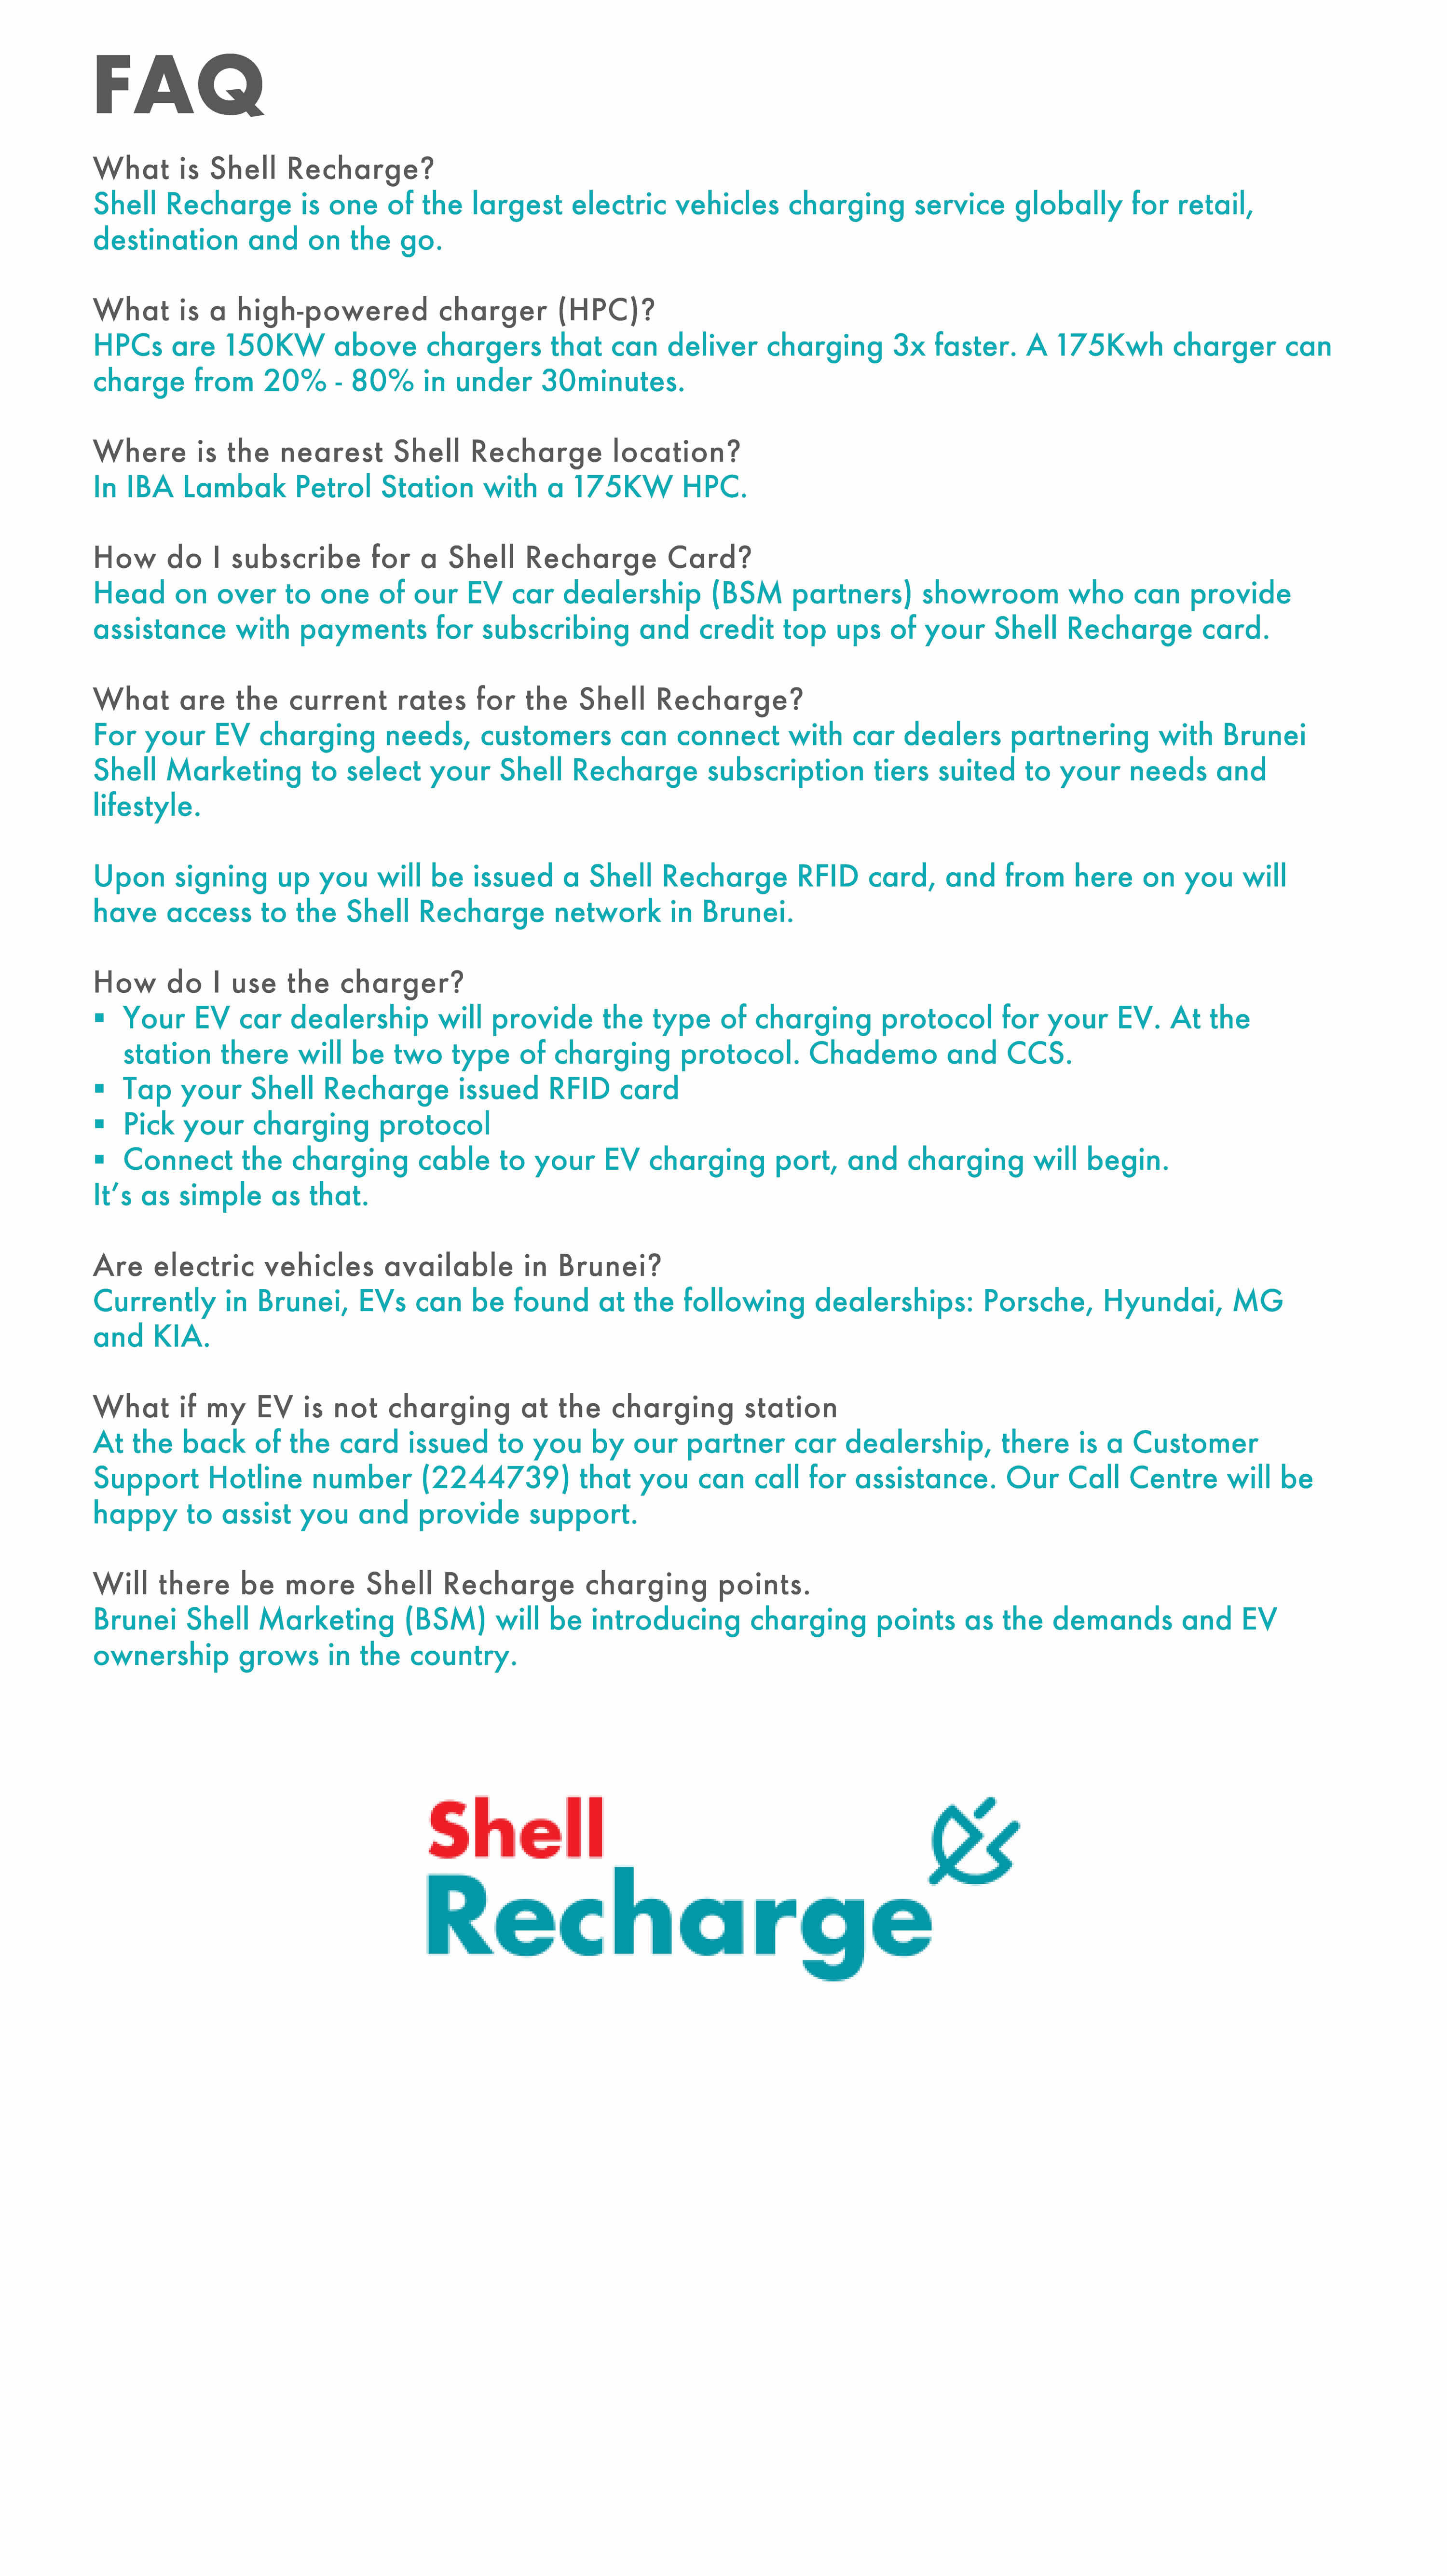 Shell Recharge Landing Page.Final.31Oct22 Page 3